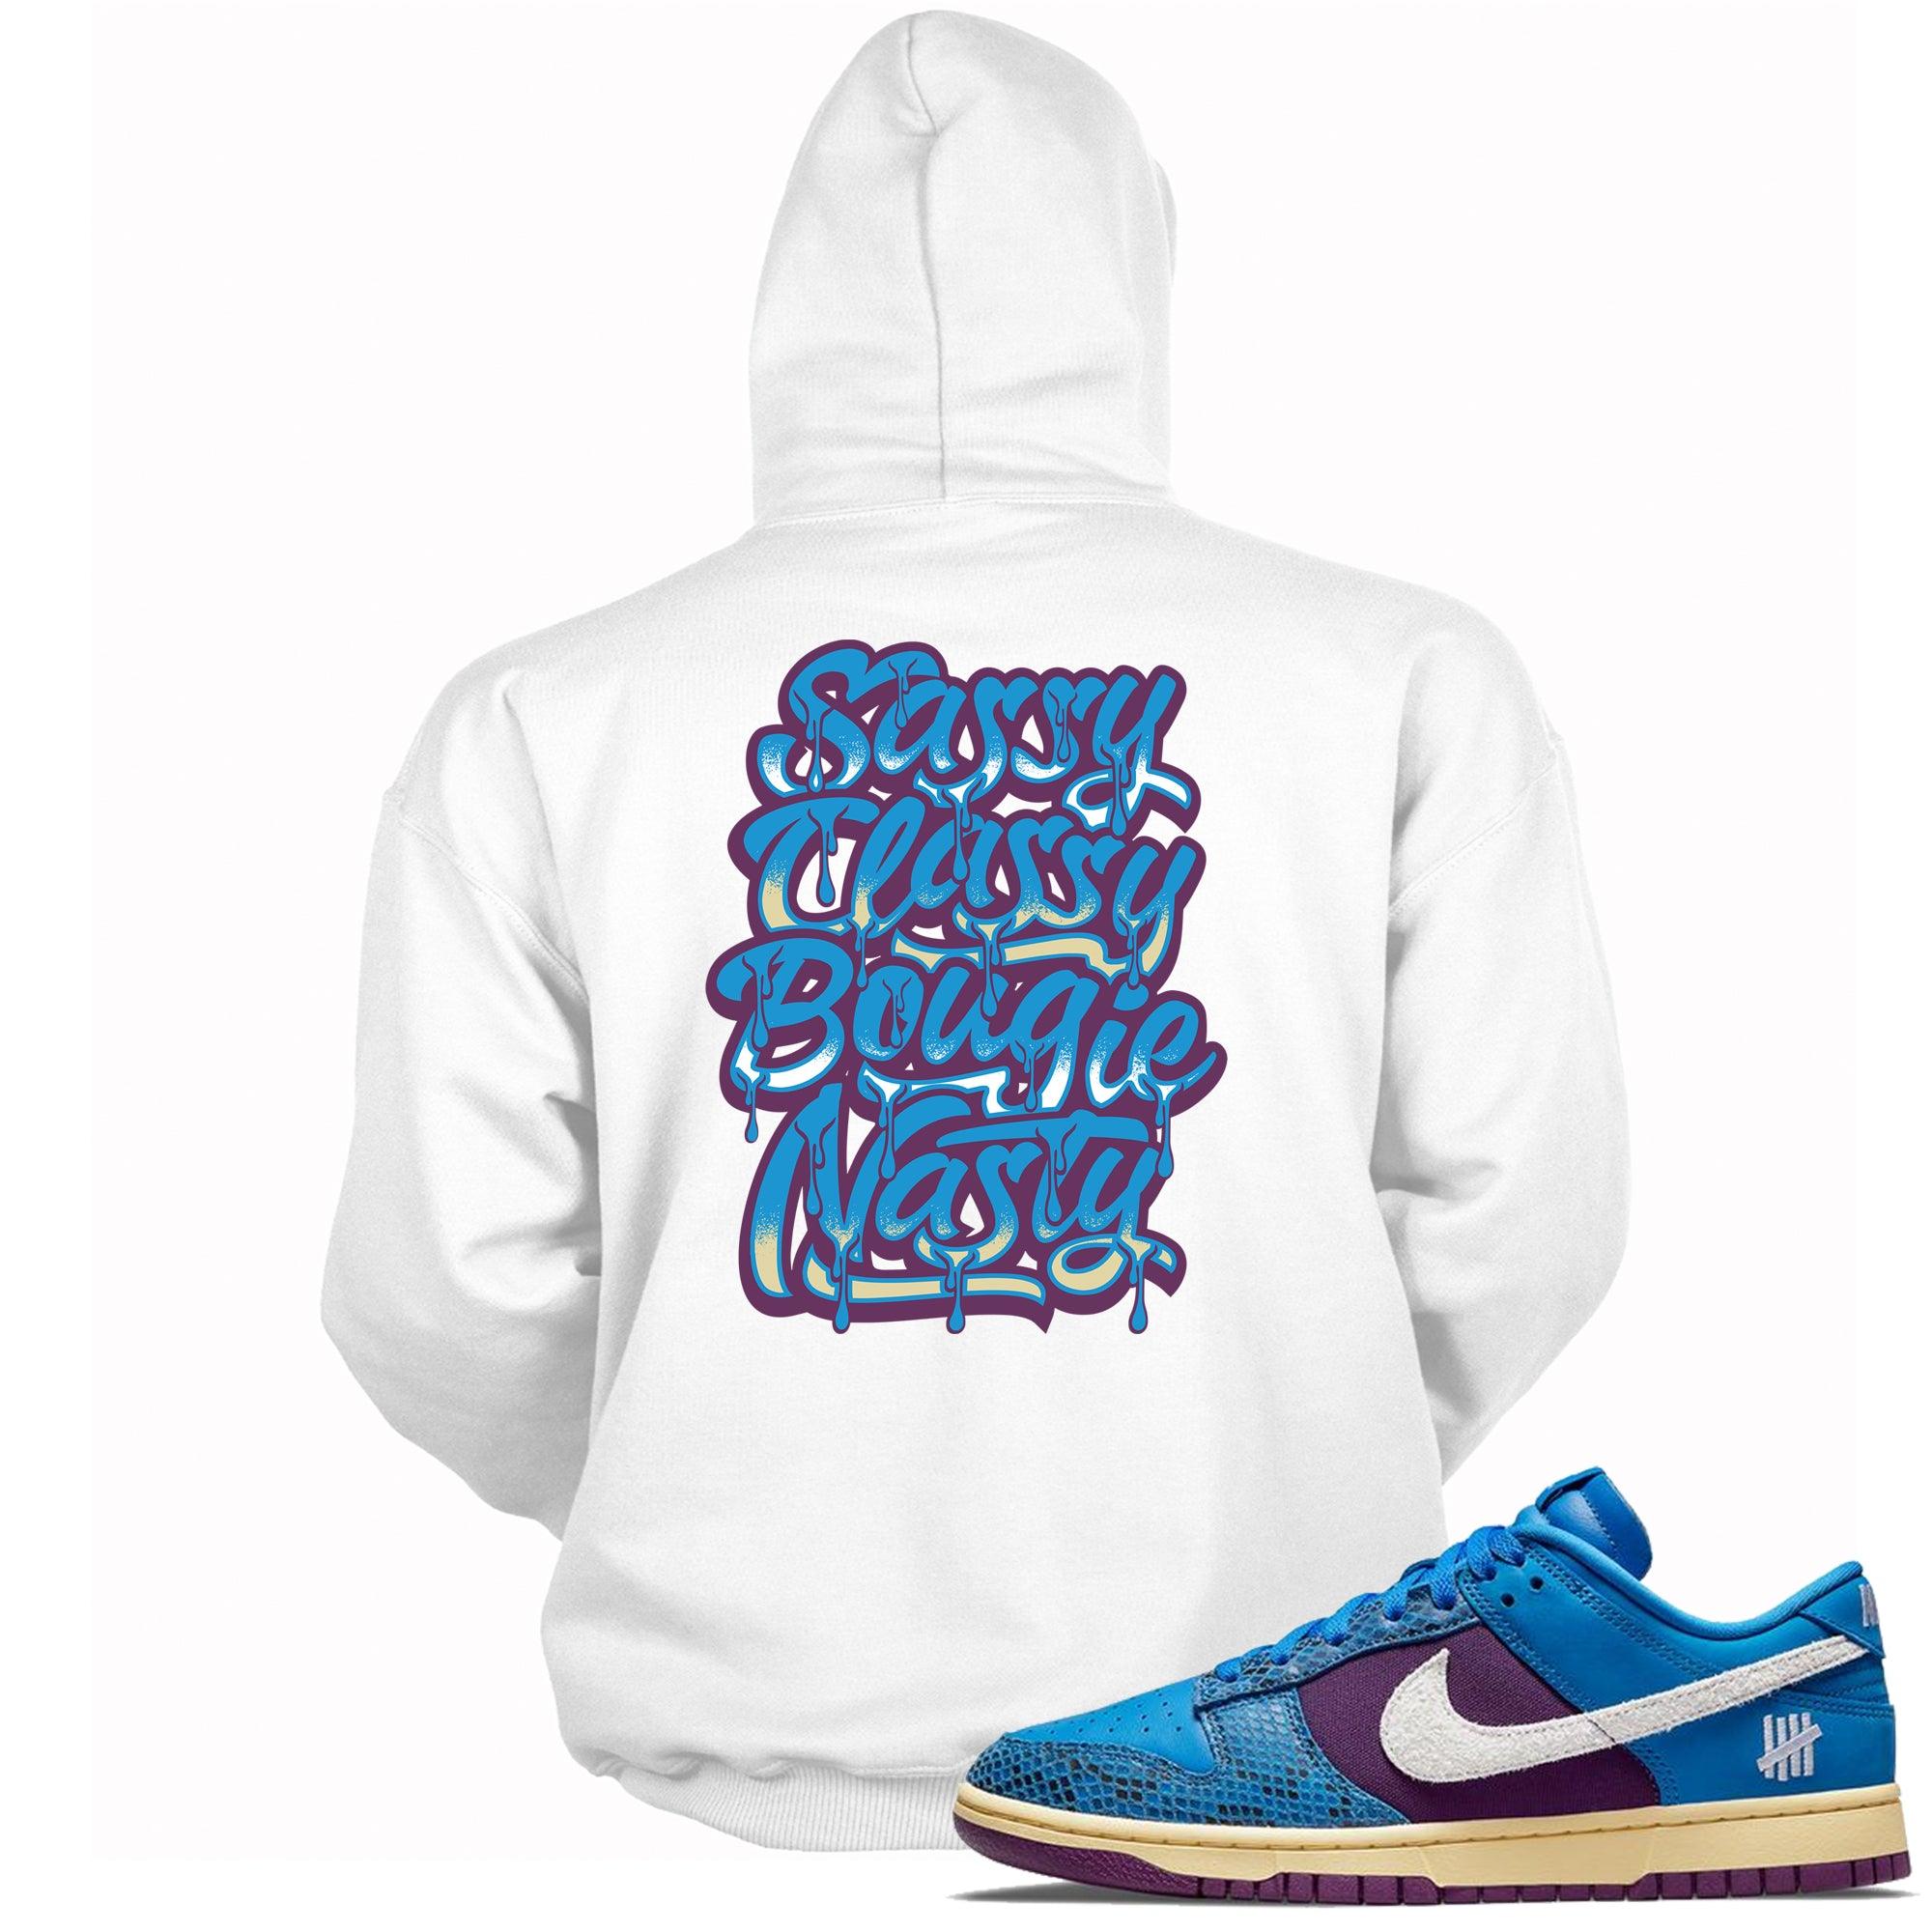 Sassy Classy Hoodie Nike Dunk Low Undefeated 5 On It Dunk vs AF1 Sneakers photo